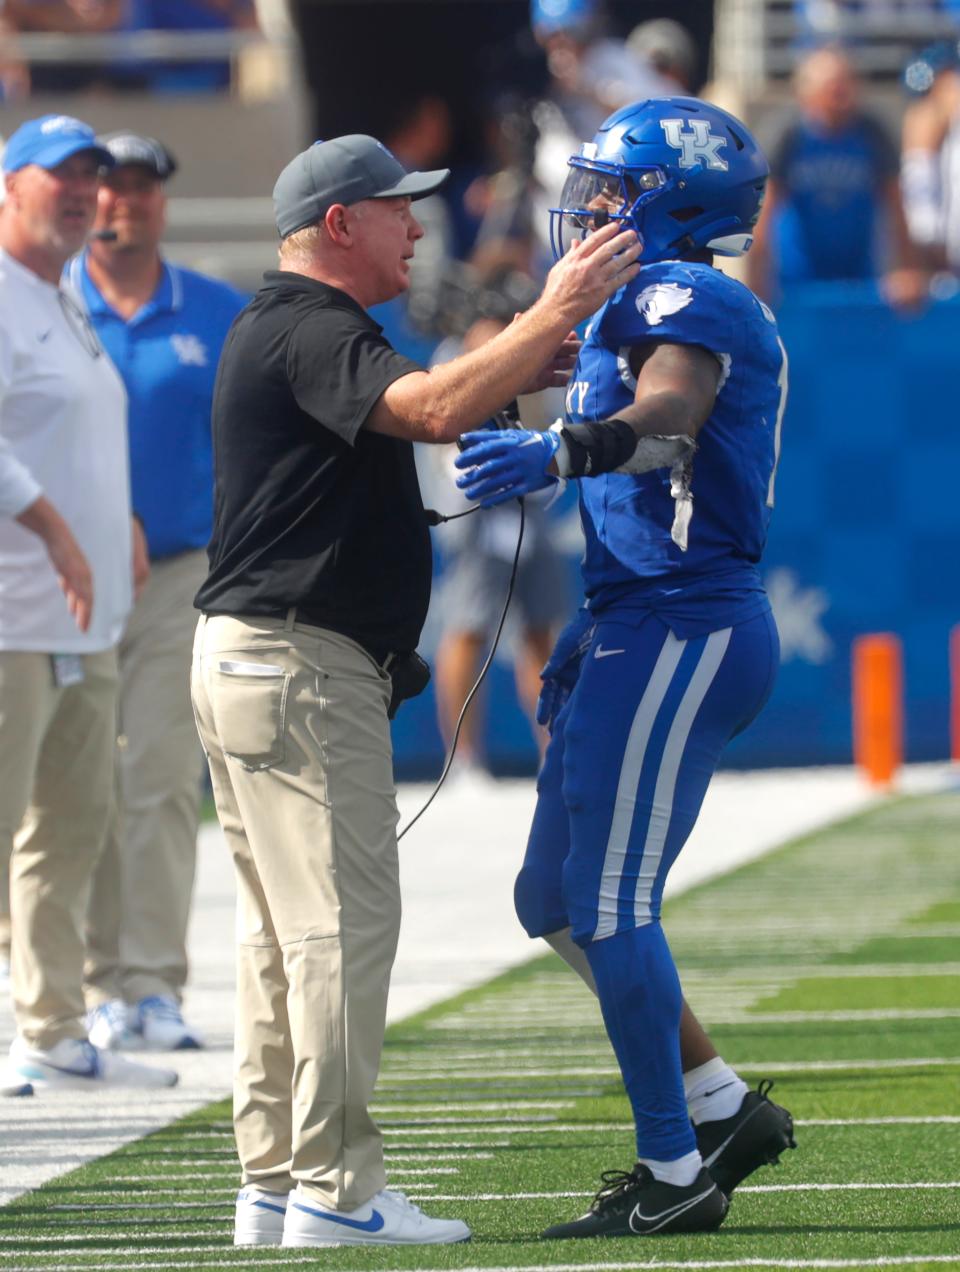 Kentucky coach Mark Stoops congratulates running back Ray Davis, who ran for 280 yards in a 33-14 win against Florida on Saturday.